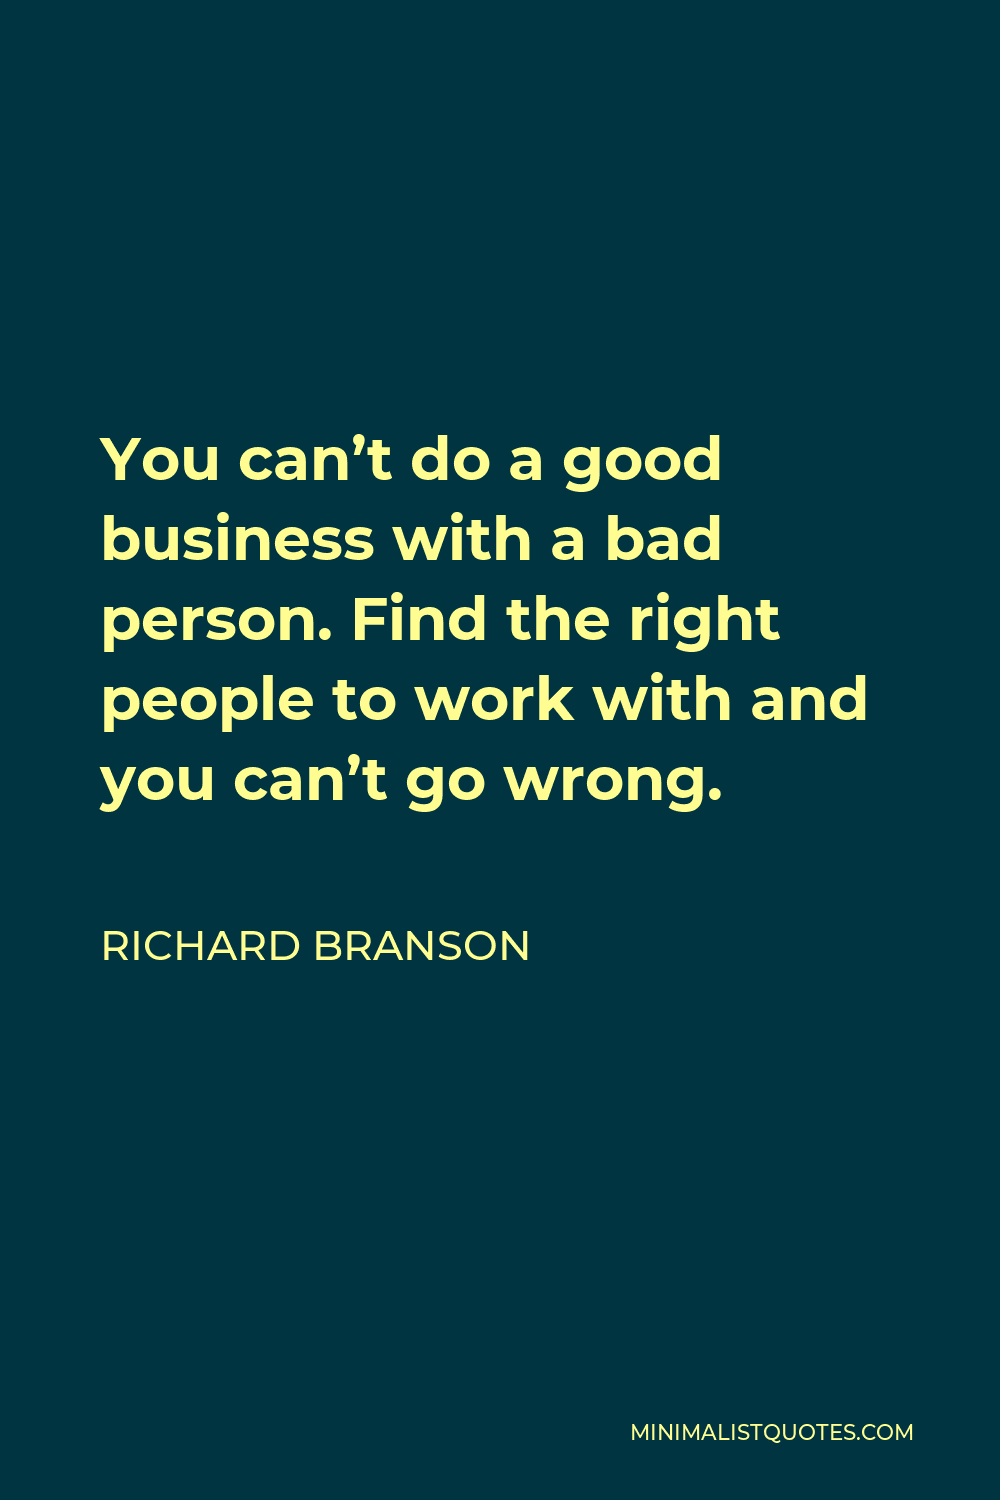 Richard Branson Quote - You can’t do a good business with a bad person. Find the right people to work with and you can’t go wrong.